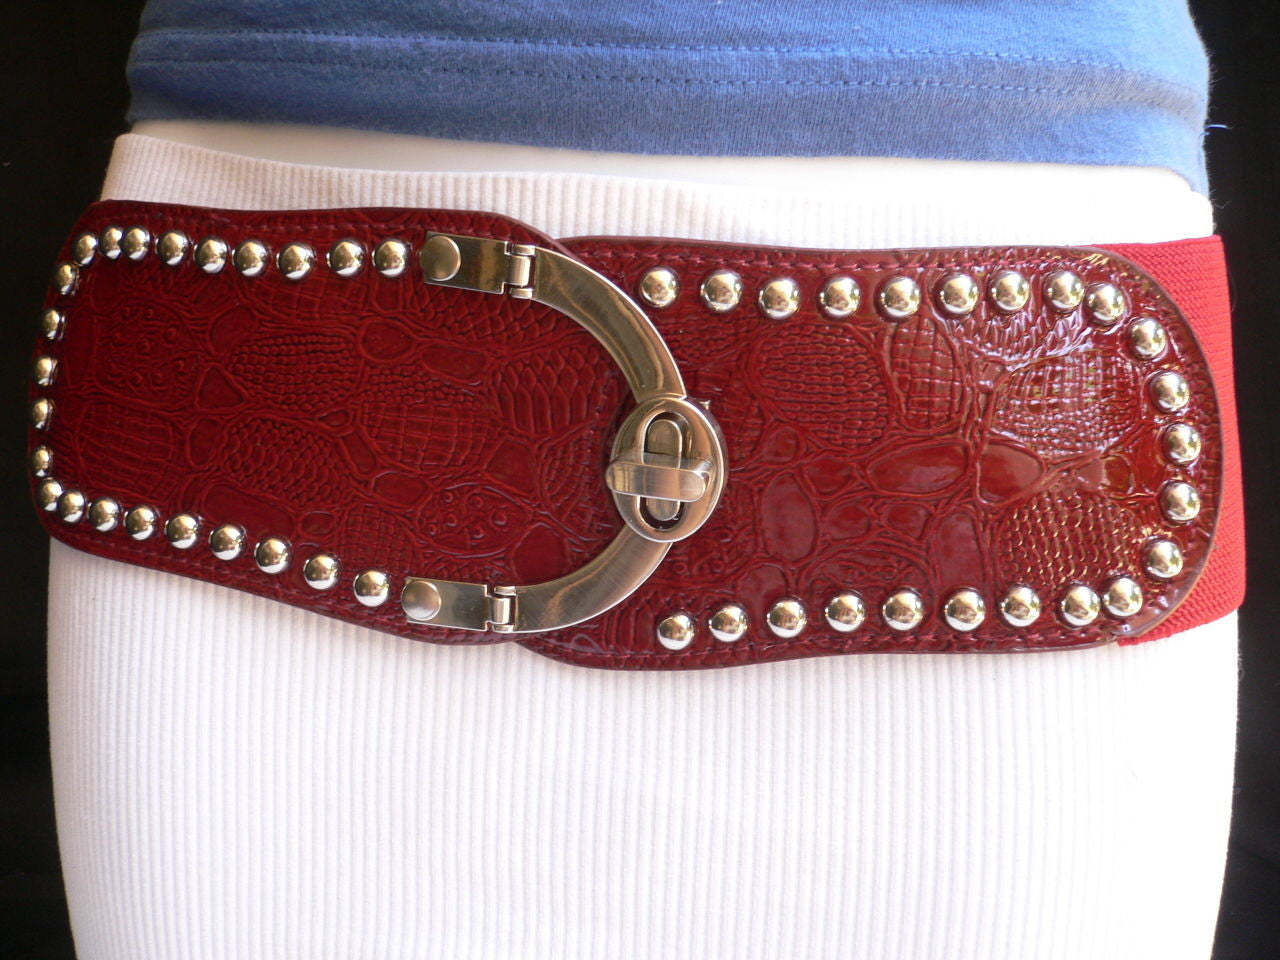 Red Faux Leather Stretch Back Crocodile Stamp Wide Belt Gold Metal Buckle Women Accessories XS-L - alwaystyle4you - 1